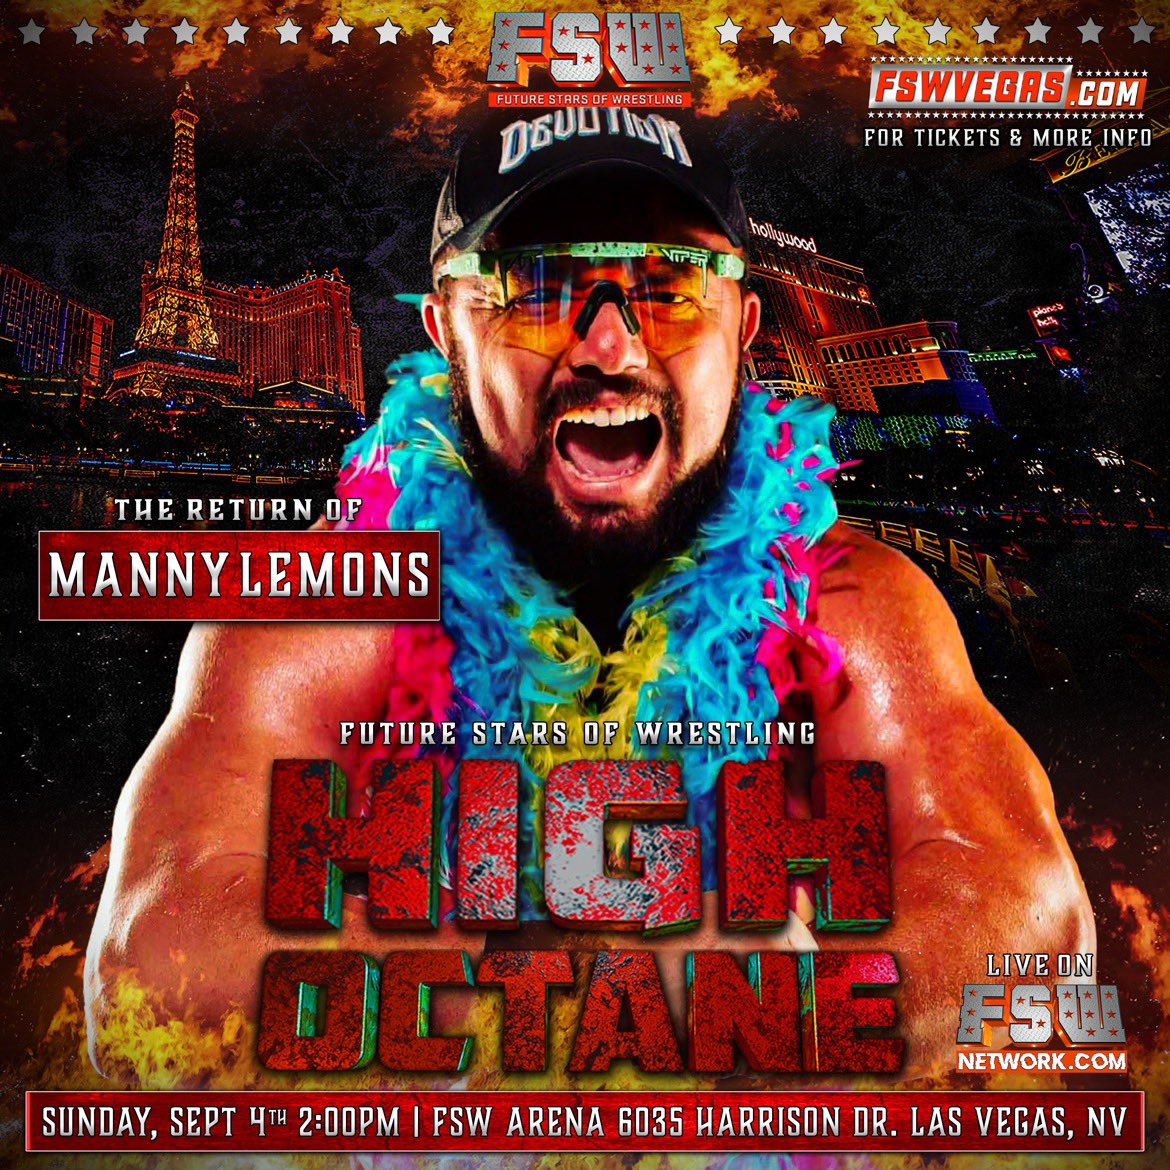 Oh baby!!! Las Vegas it’s been too long. Happy to announce my return to @FSWVegas this Sunday for High Octane. The lemonade stand is open for business, Bell time 2pm. Get your tickets now: FSWvegas.com #zestmovement #zestofthebest #zestforlife #fsw #lasvegas